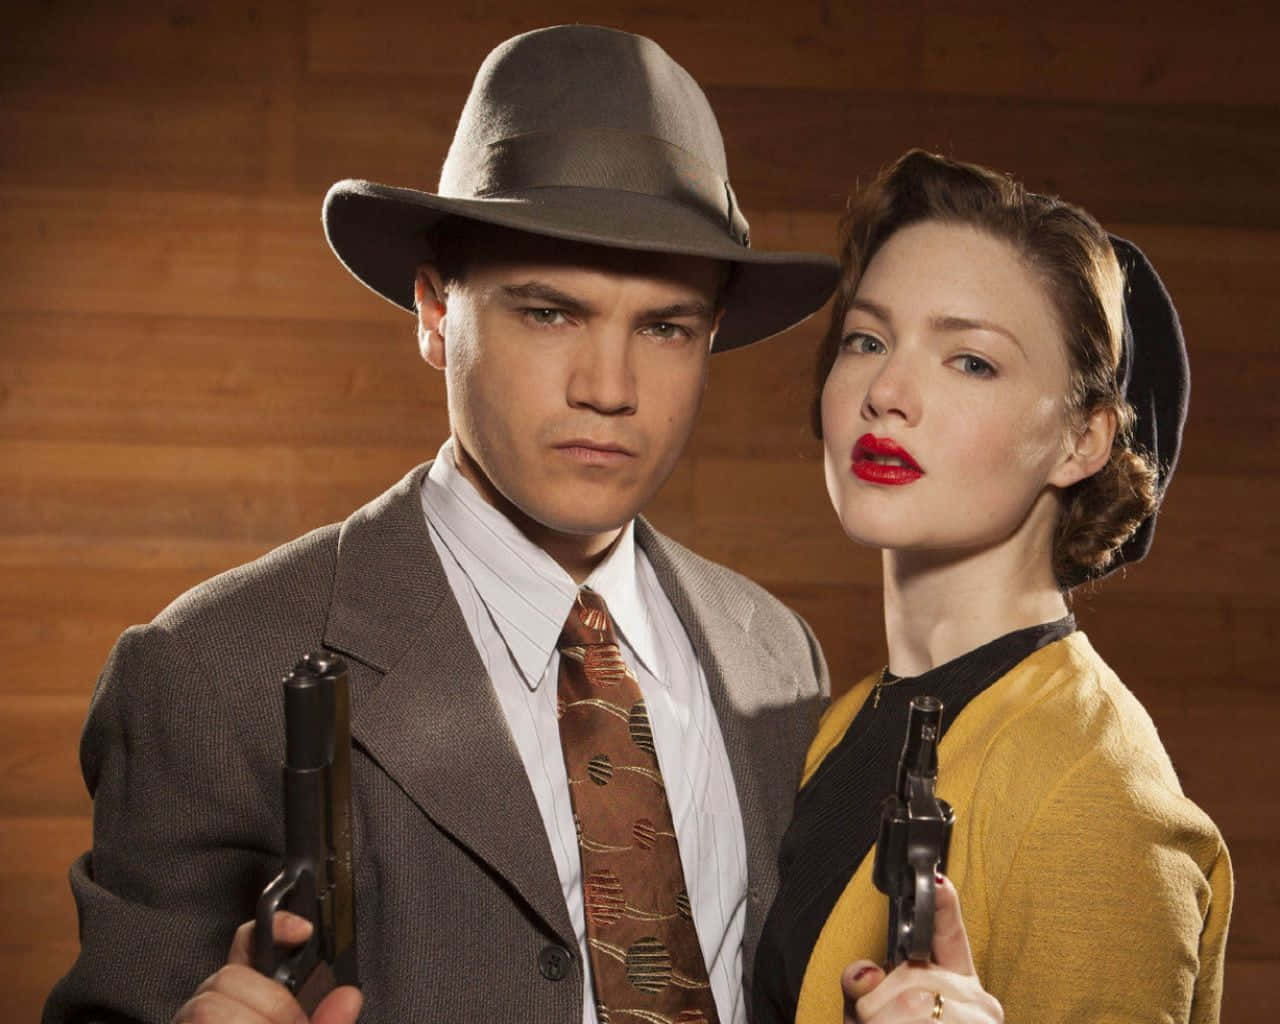 "The famous gangsters Bonnie and Clyde eluding authorities in the 1930s."